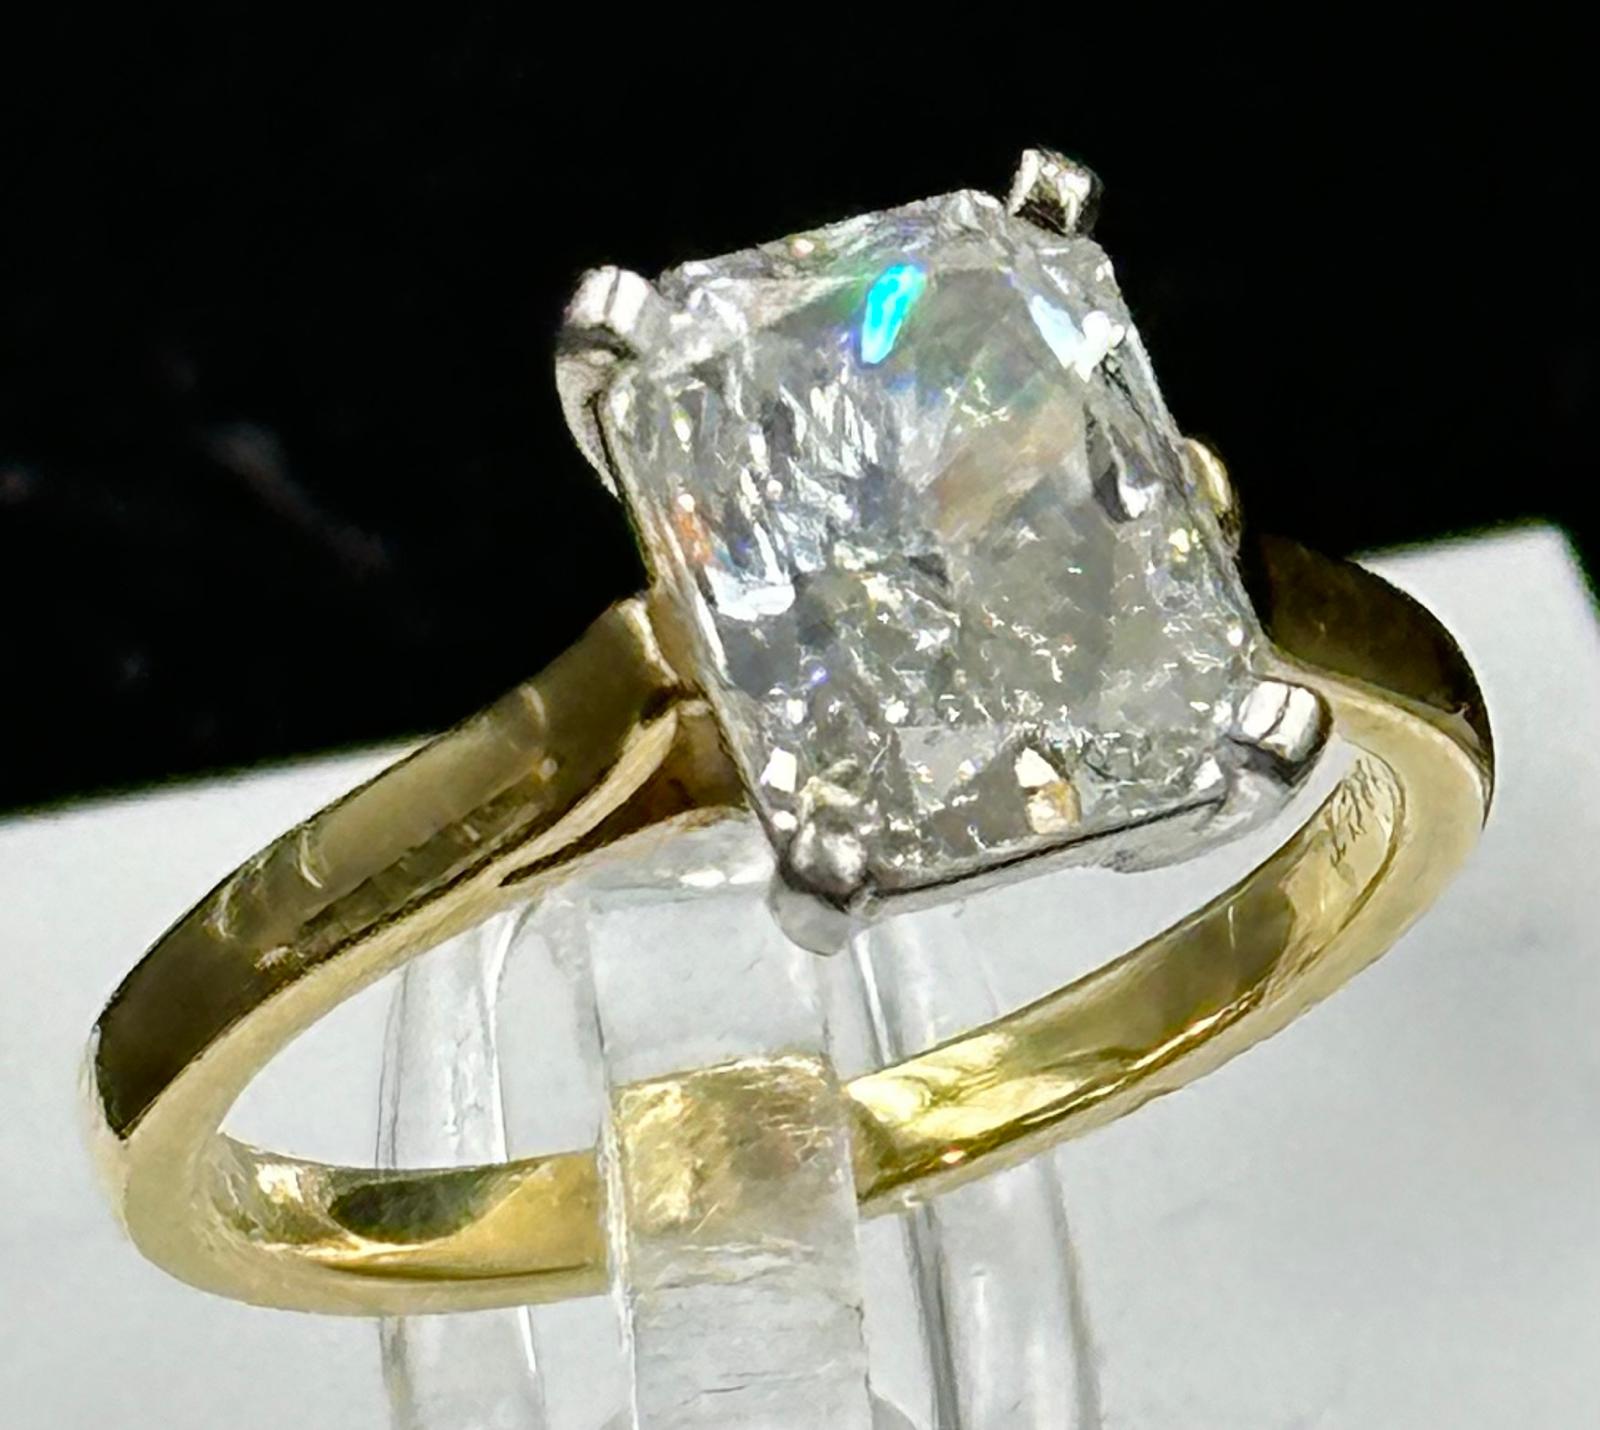 2.10ct Cushion cut diamond solitaire ring mounted in platinum and 18ct gold. Signed Tiffany & Co. - Image 4 of 5